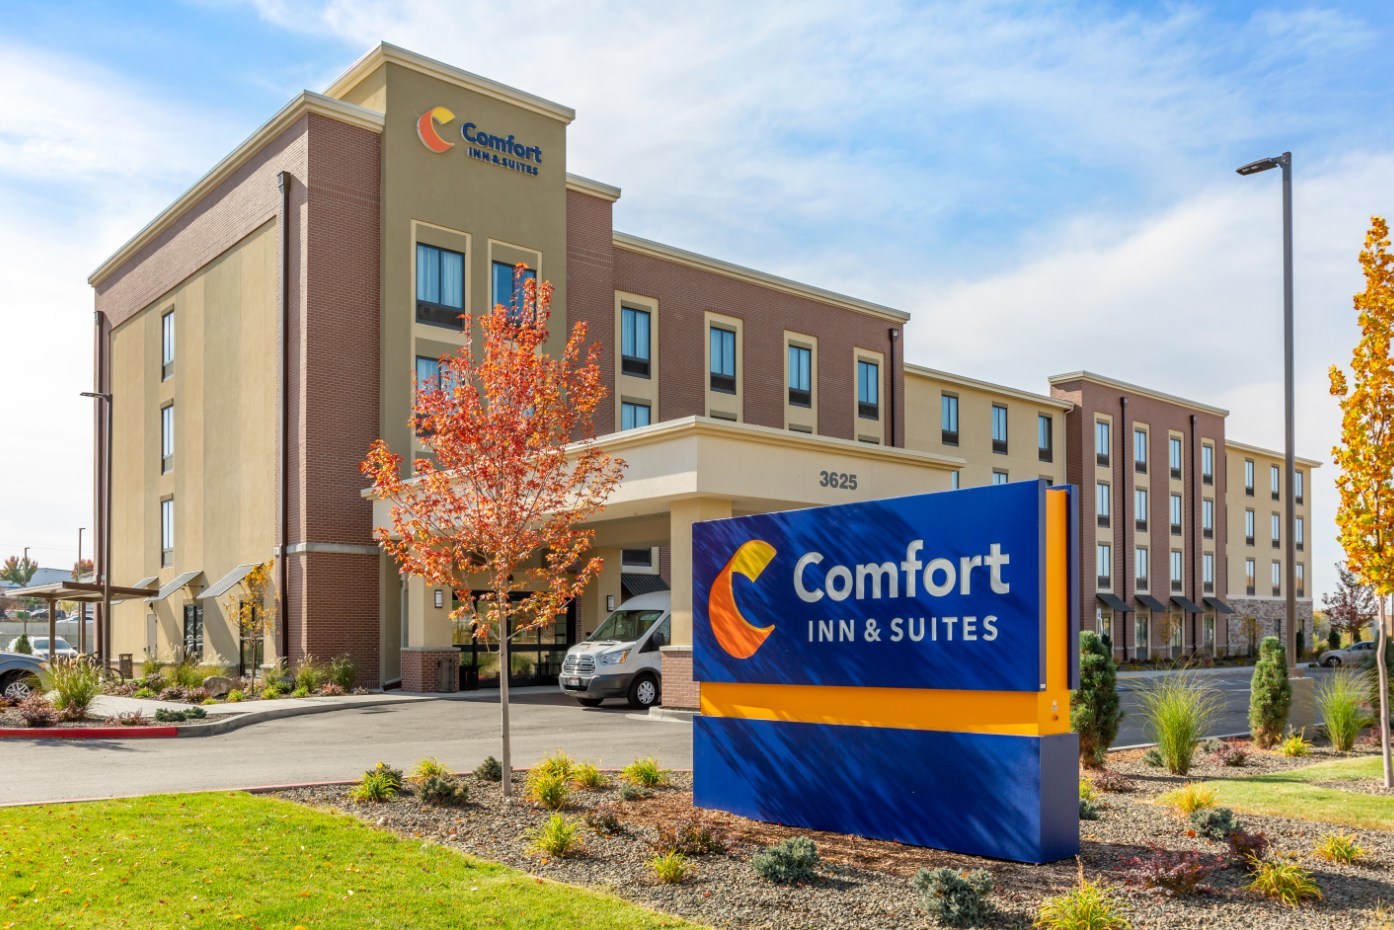 The New Comfort Debuts 500th Hotel With Refreshed Branding ...